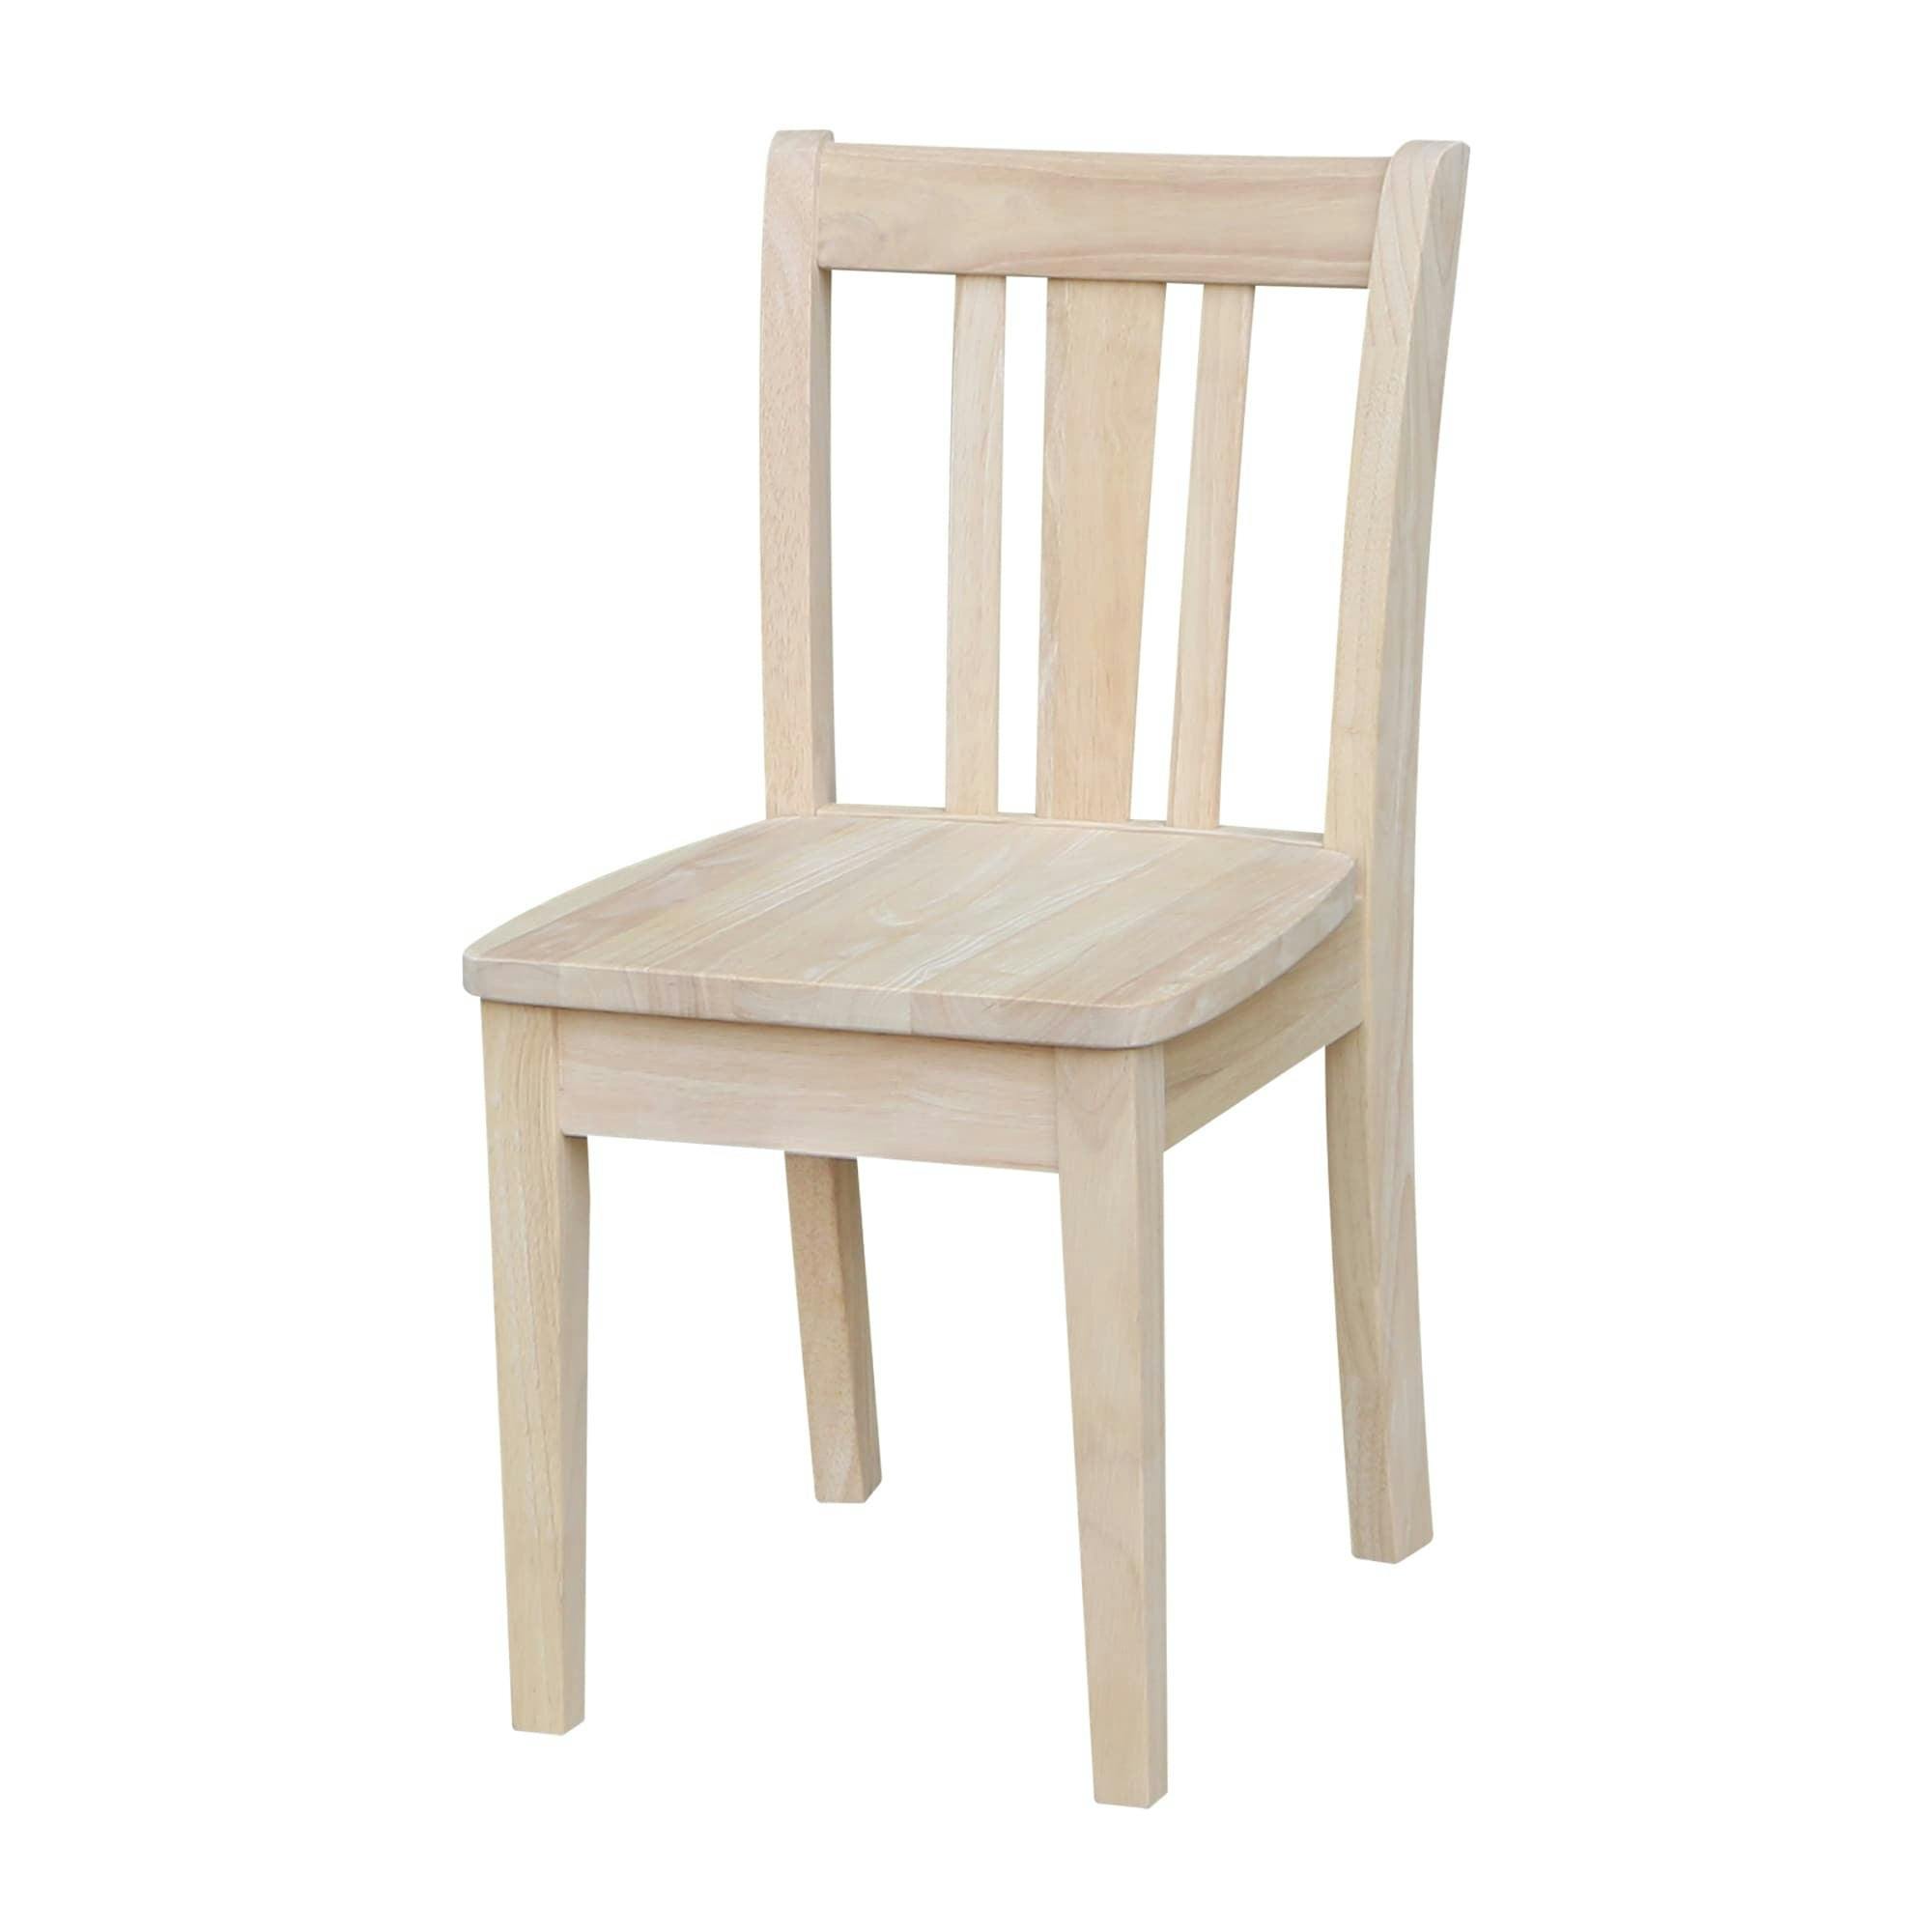 Eco-Friendly Parawood San Remo Juvenile Chairs, Unfinished - Set of 2